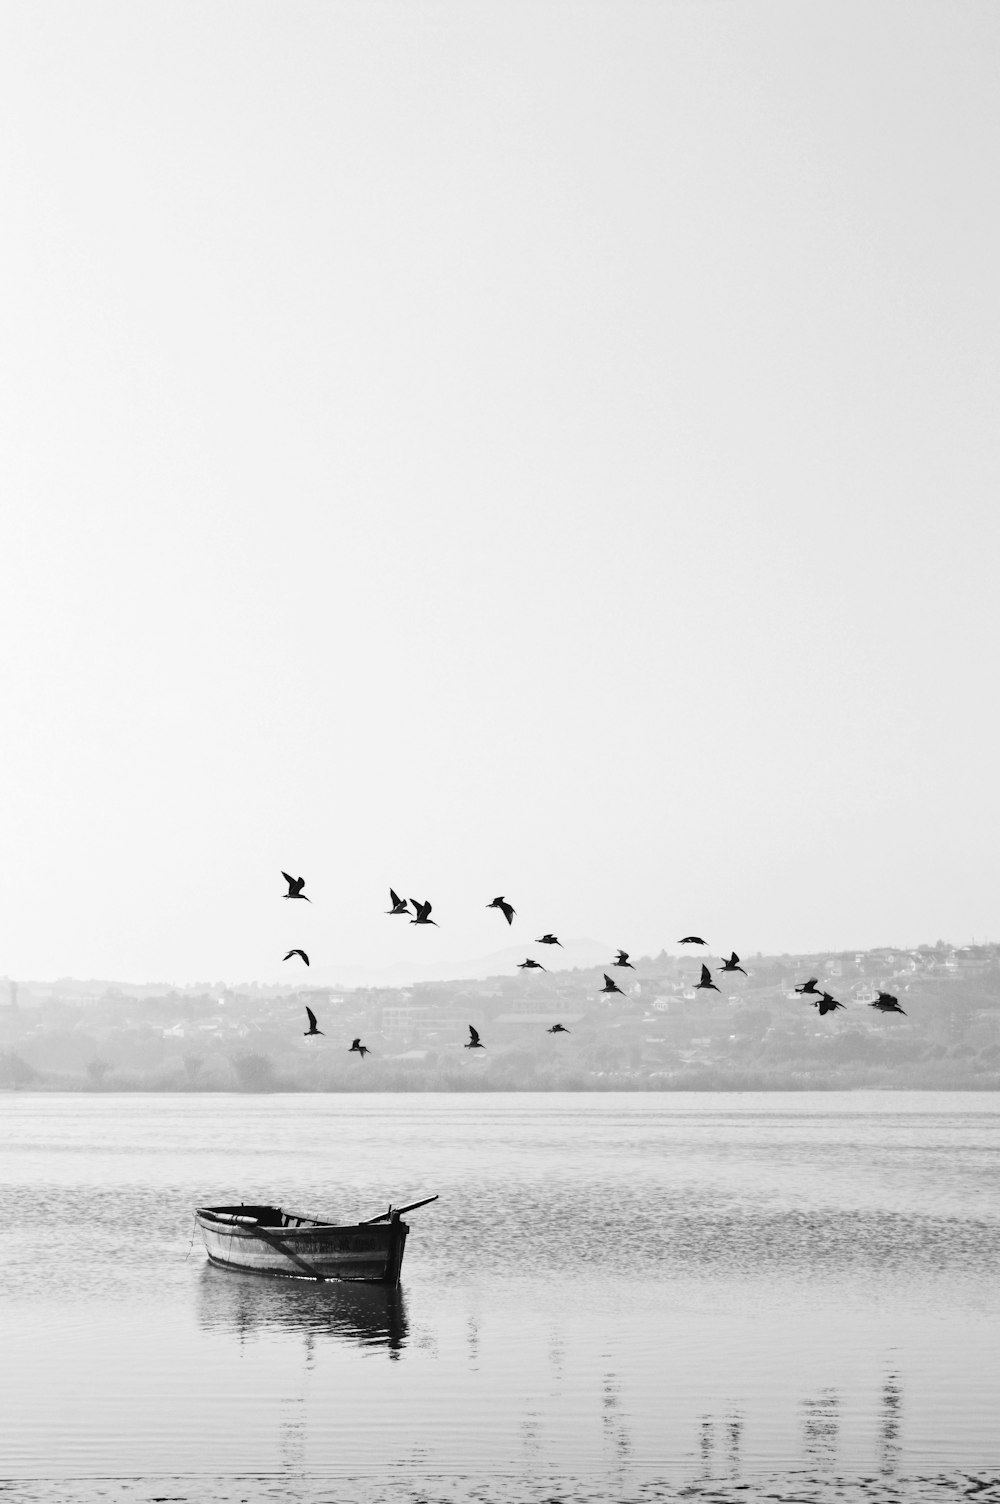 100+ Black White Pictures [HD] | Download Free Images on Unsplash